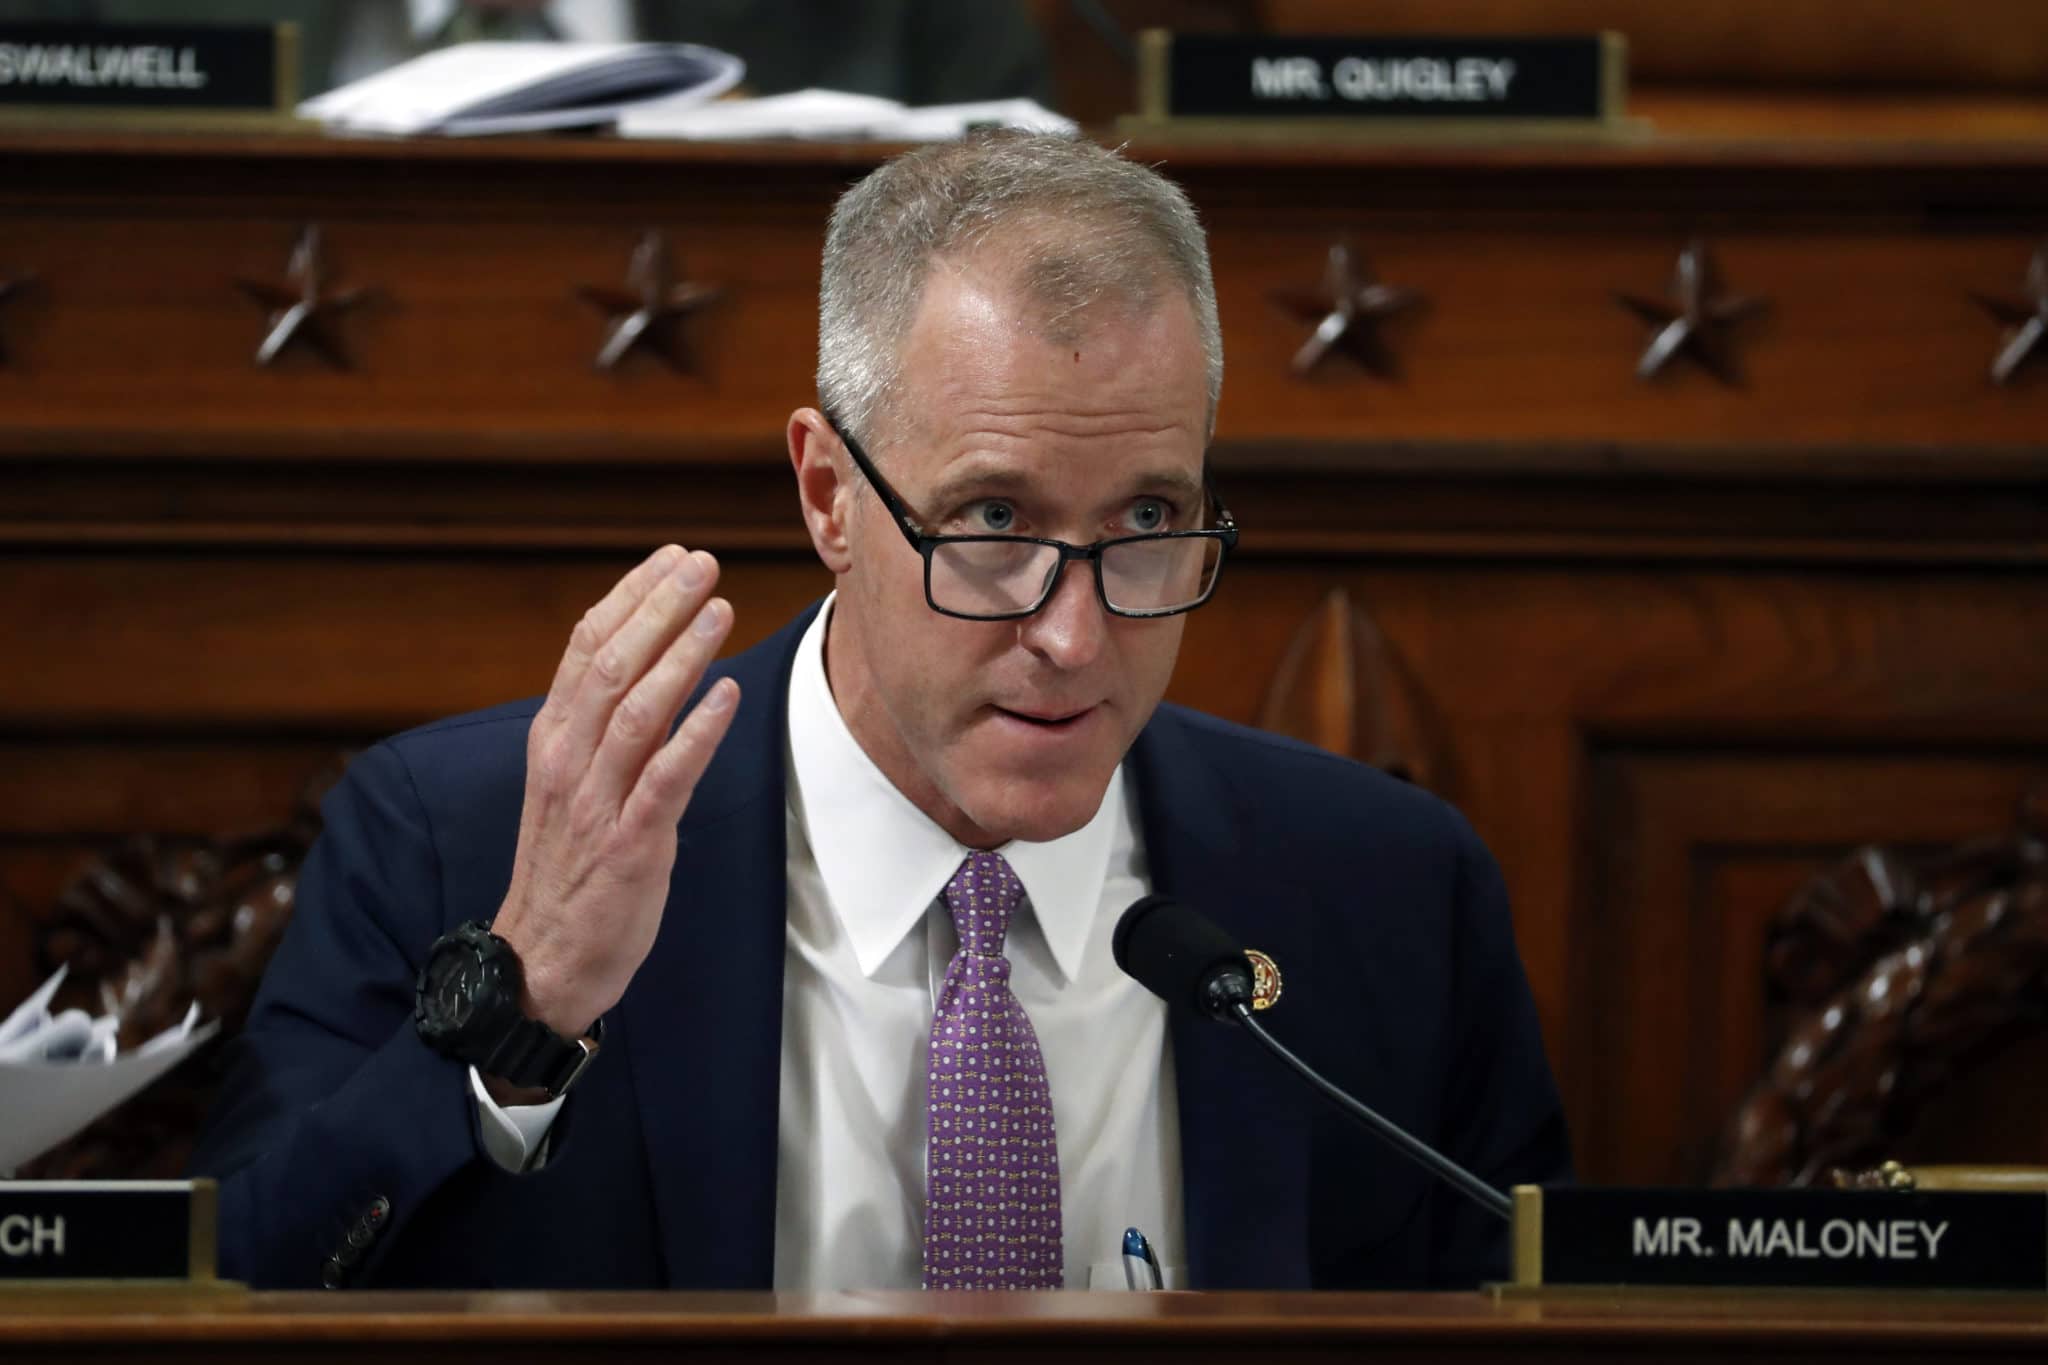 Gay congressman Sean Patrick Maloney has been elected to a powerful role